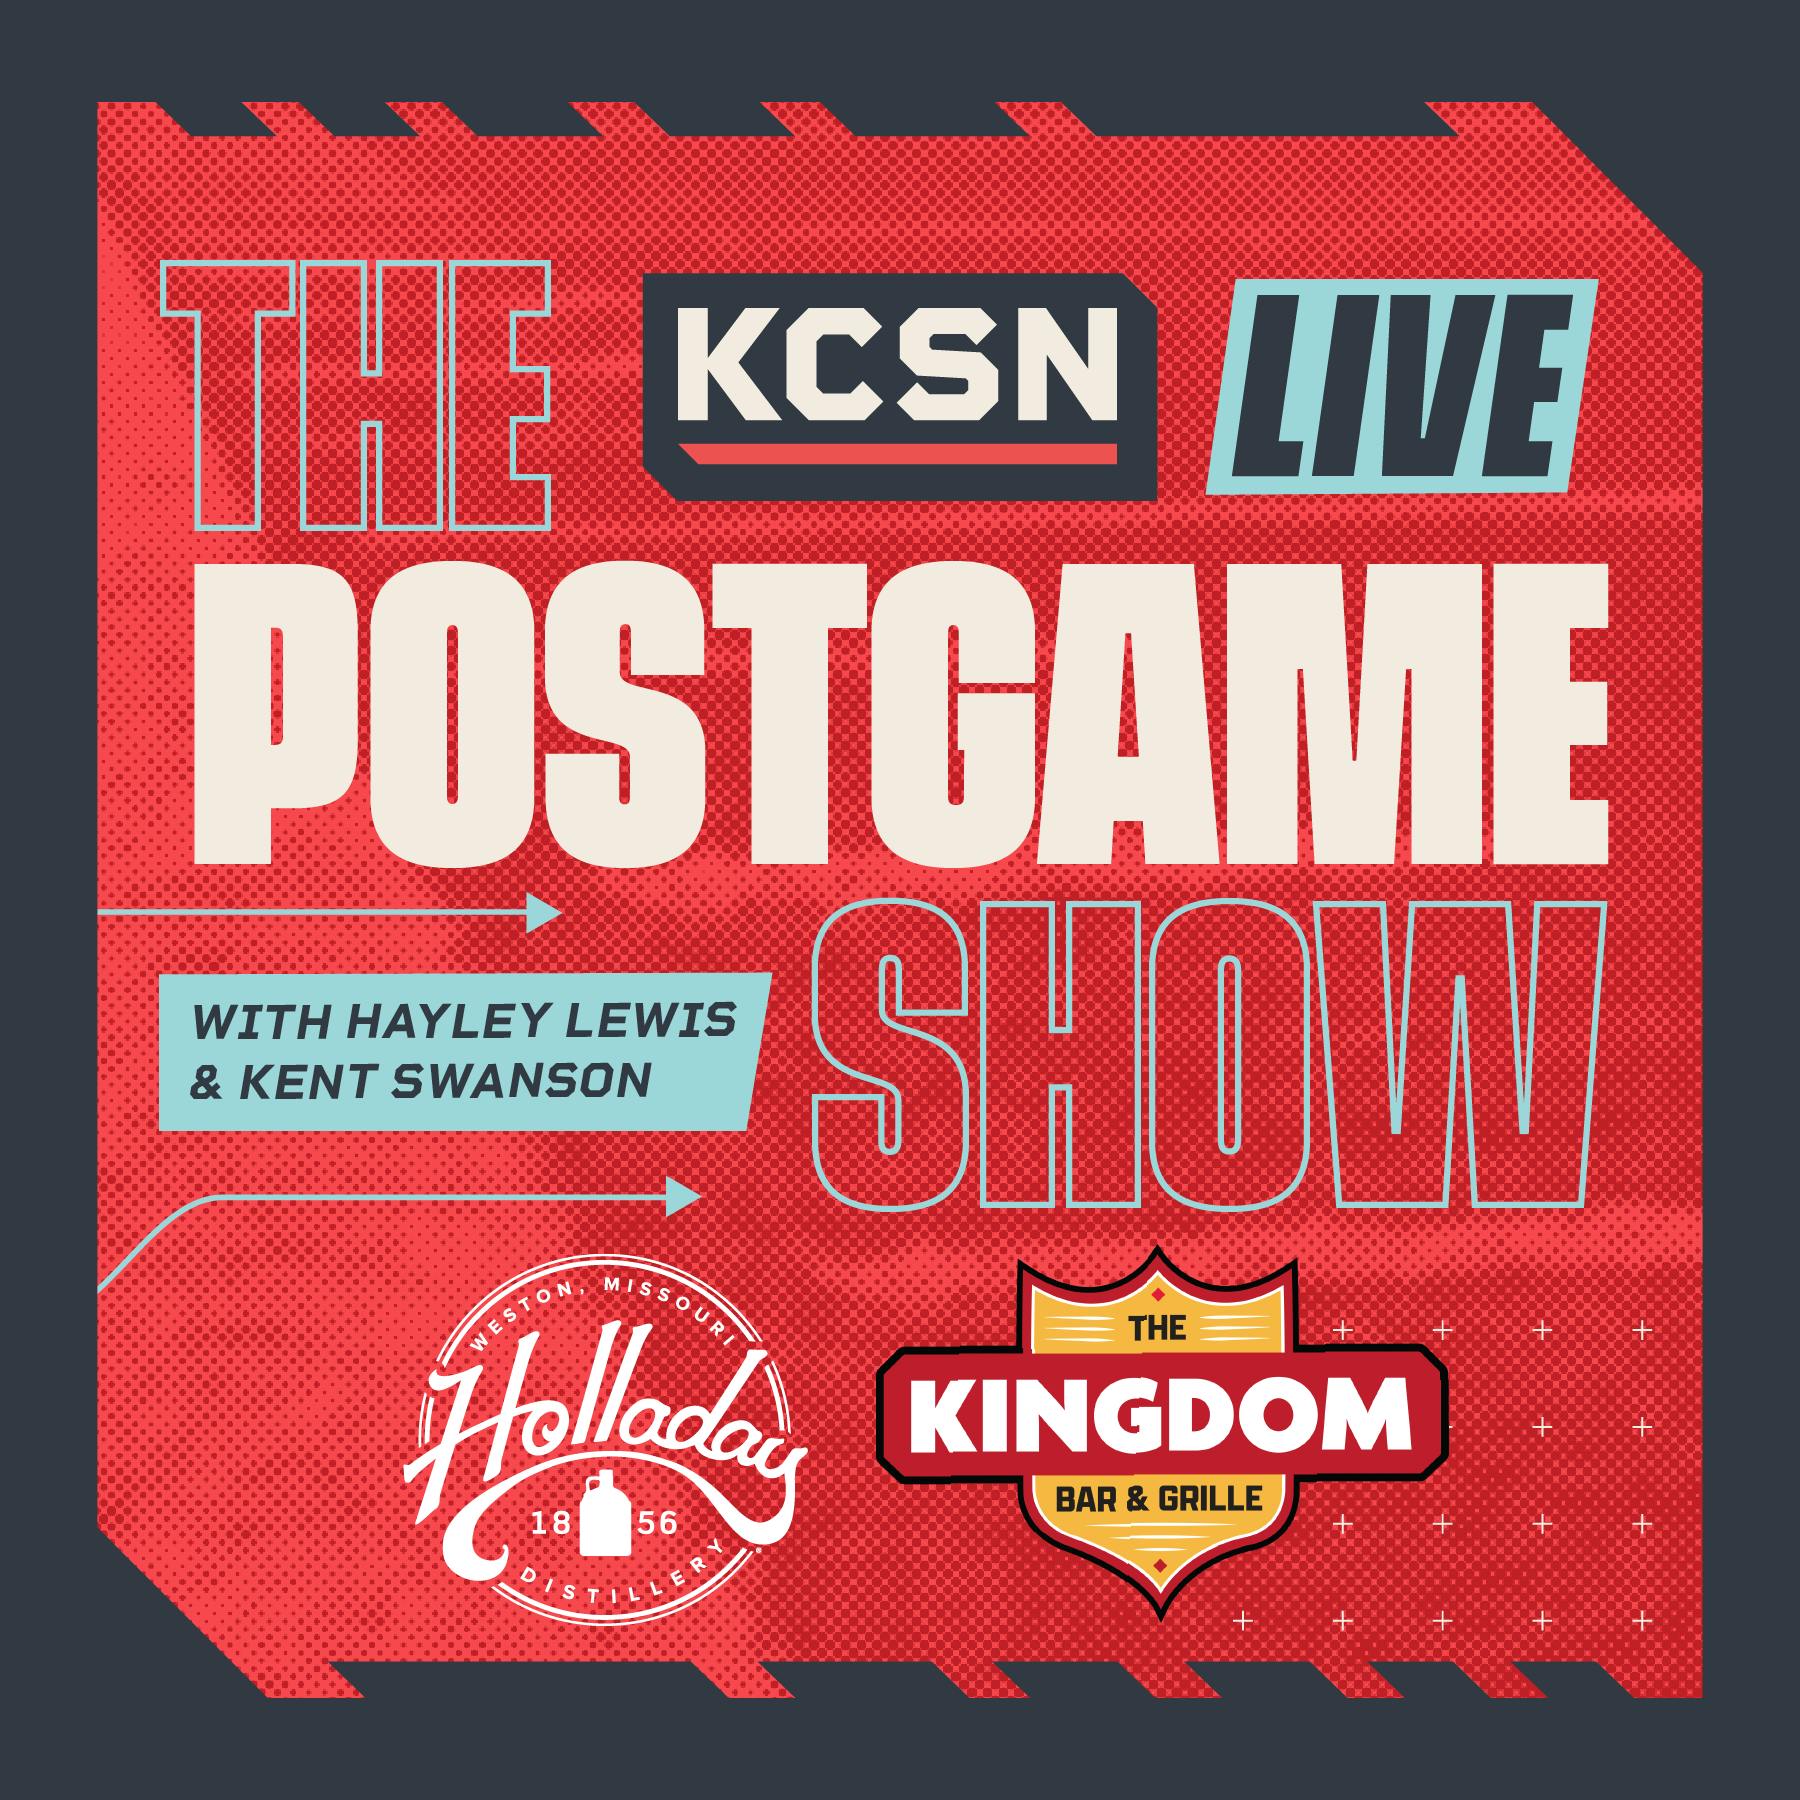 KCSN Live Postgame Show 9/24: Chiefs Dominate Bears 41-10 As Offense Gets Back on Track